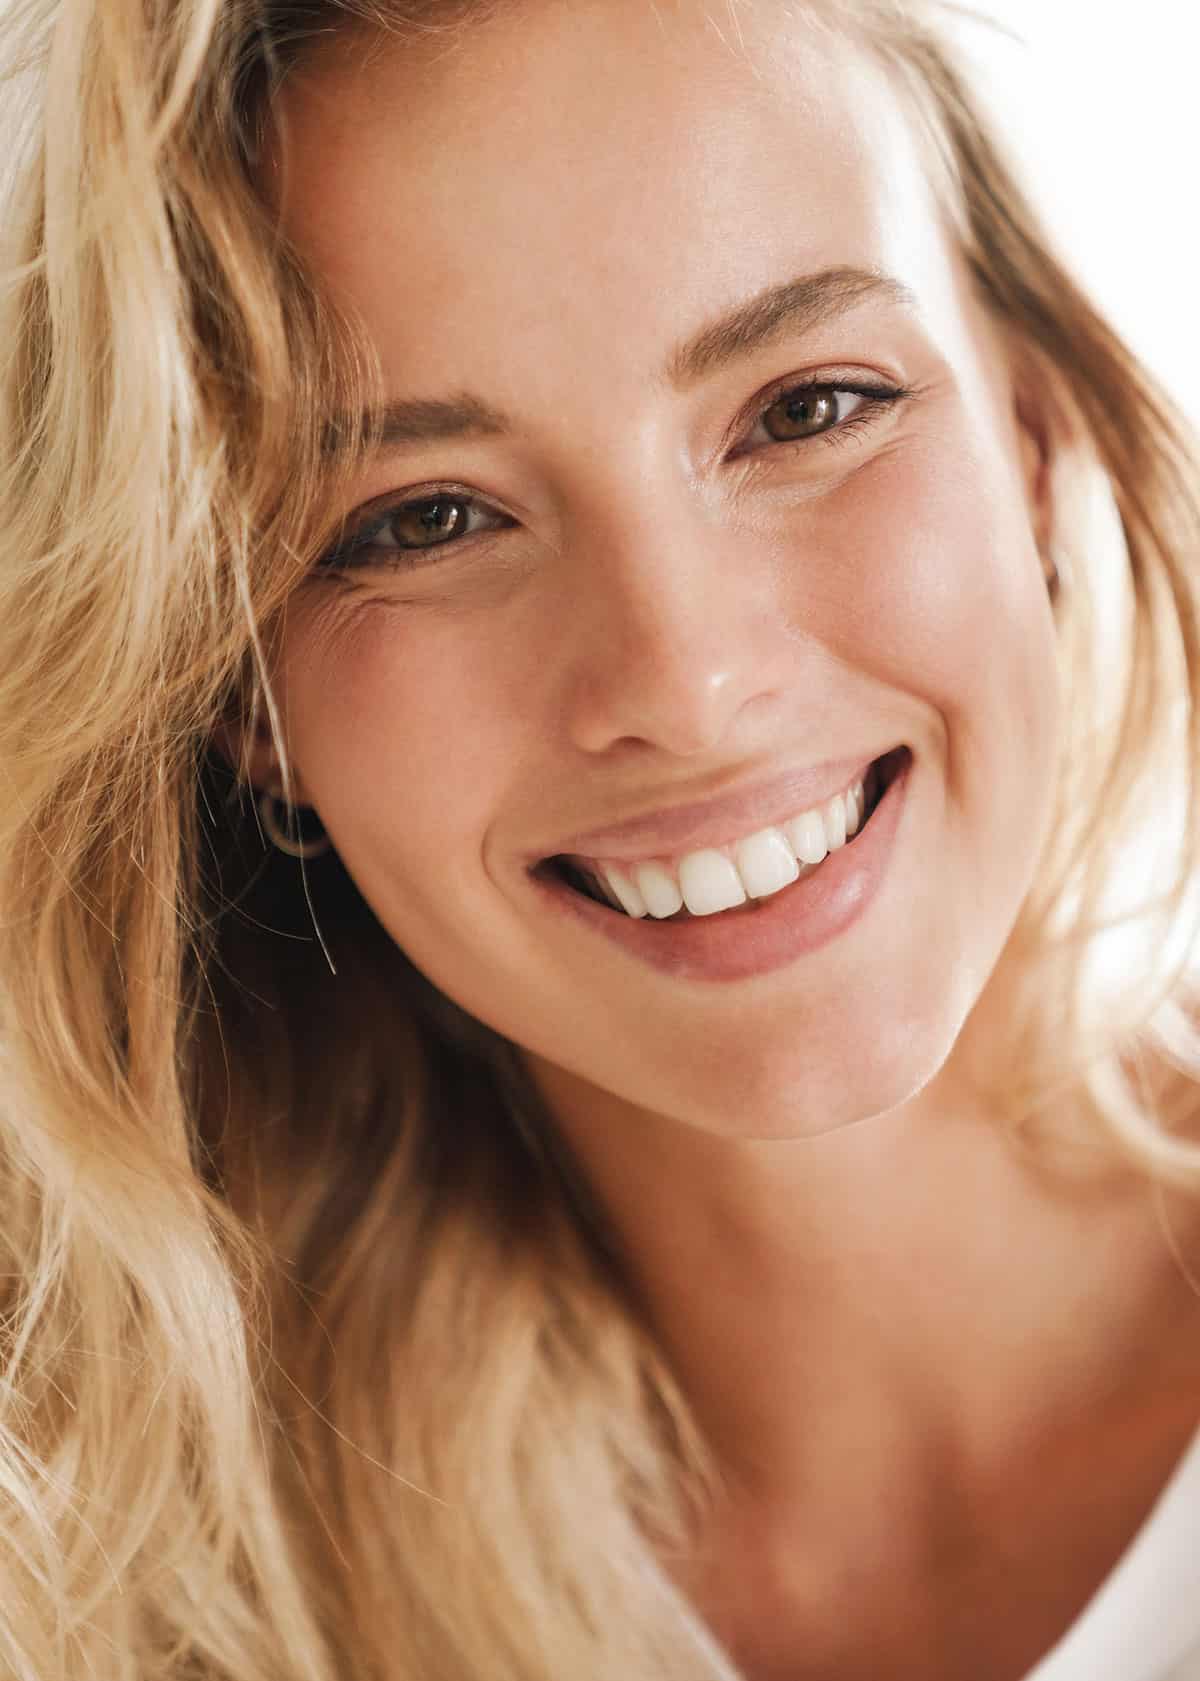 Transform Your Smile with Bethesda Dental Crowns